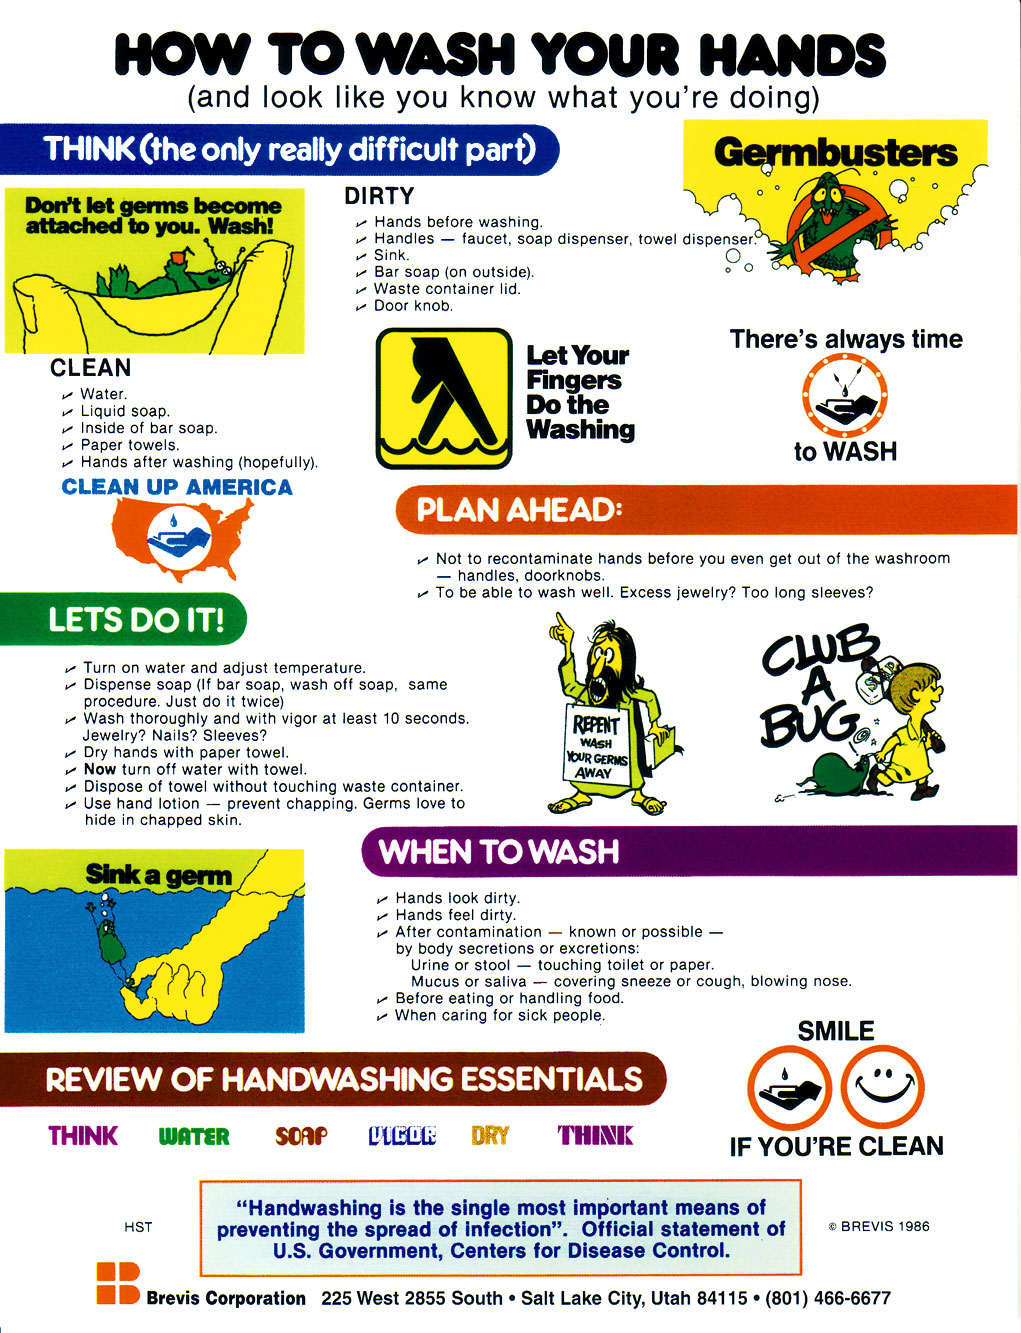 How to Wash Your Hands Poster - Brevis